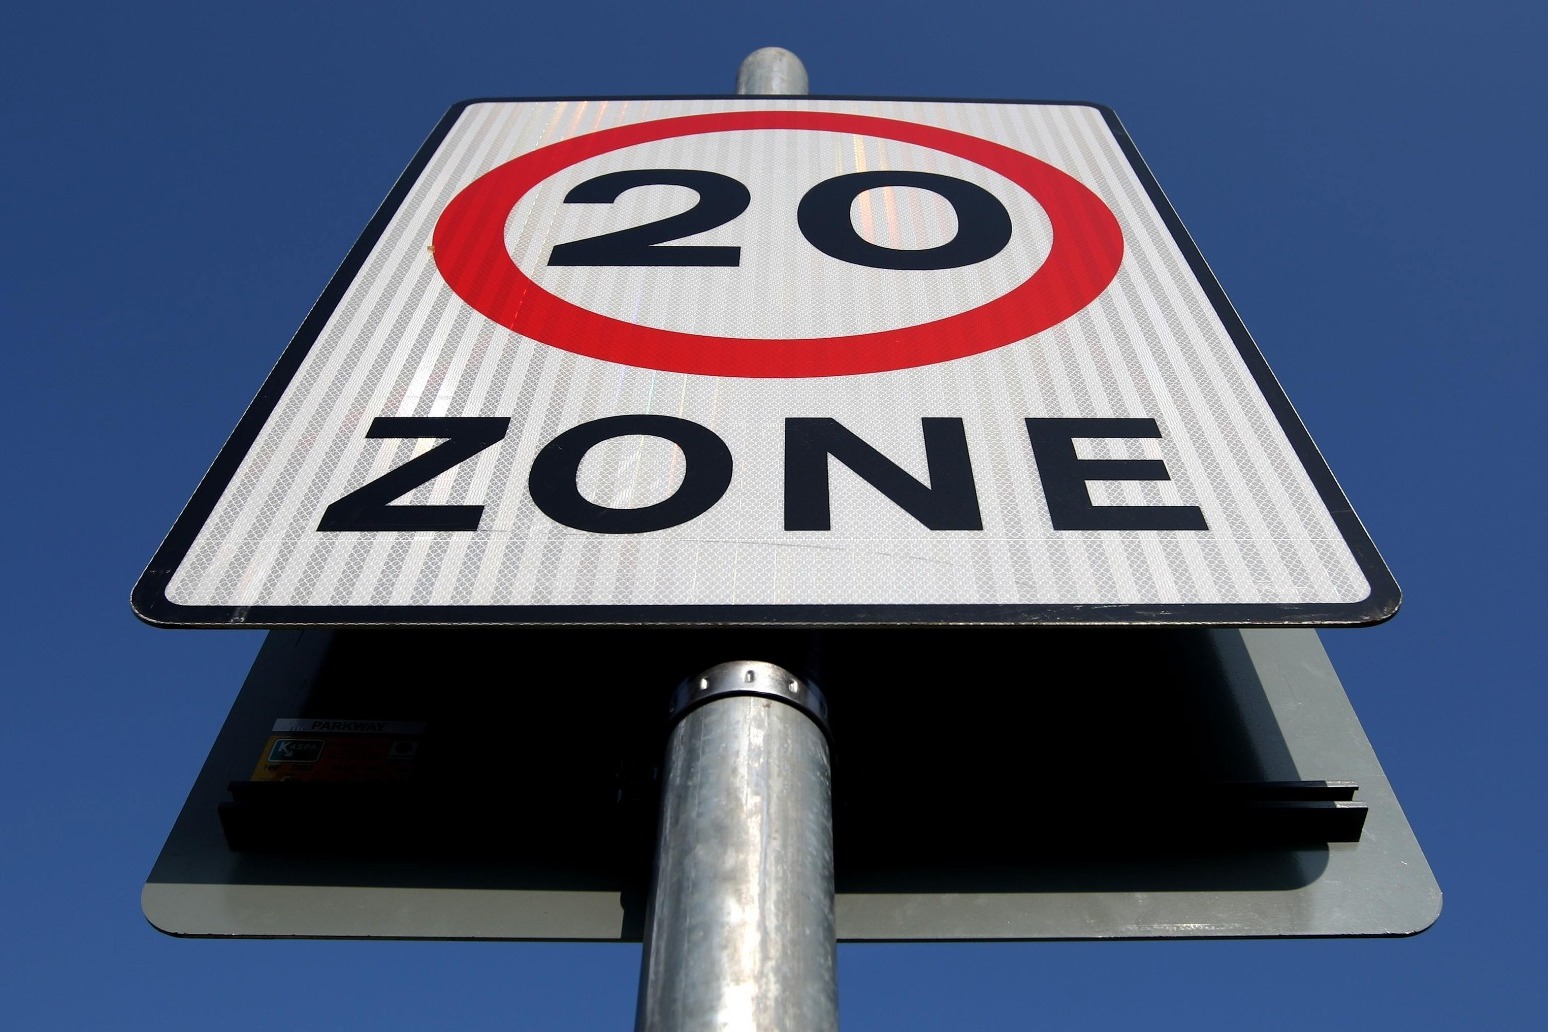 20mph speed limit for residential roads comes into force in Wales 